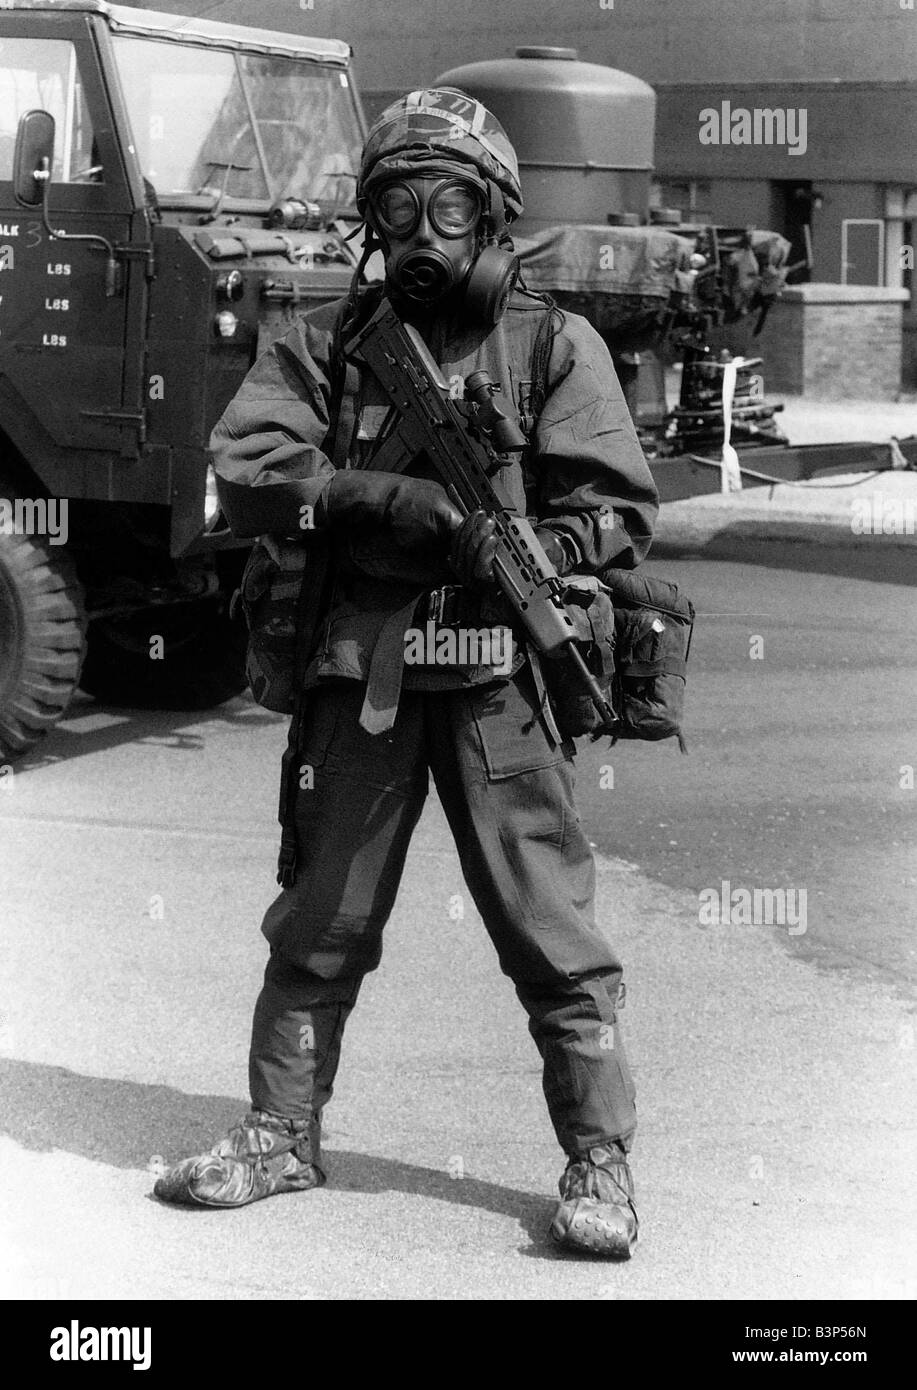 British soldier wearing chemical warfare suit August 1990 at RAF Coltishall of the type used in the Gulf War Stock Photo